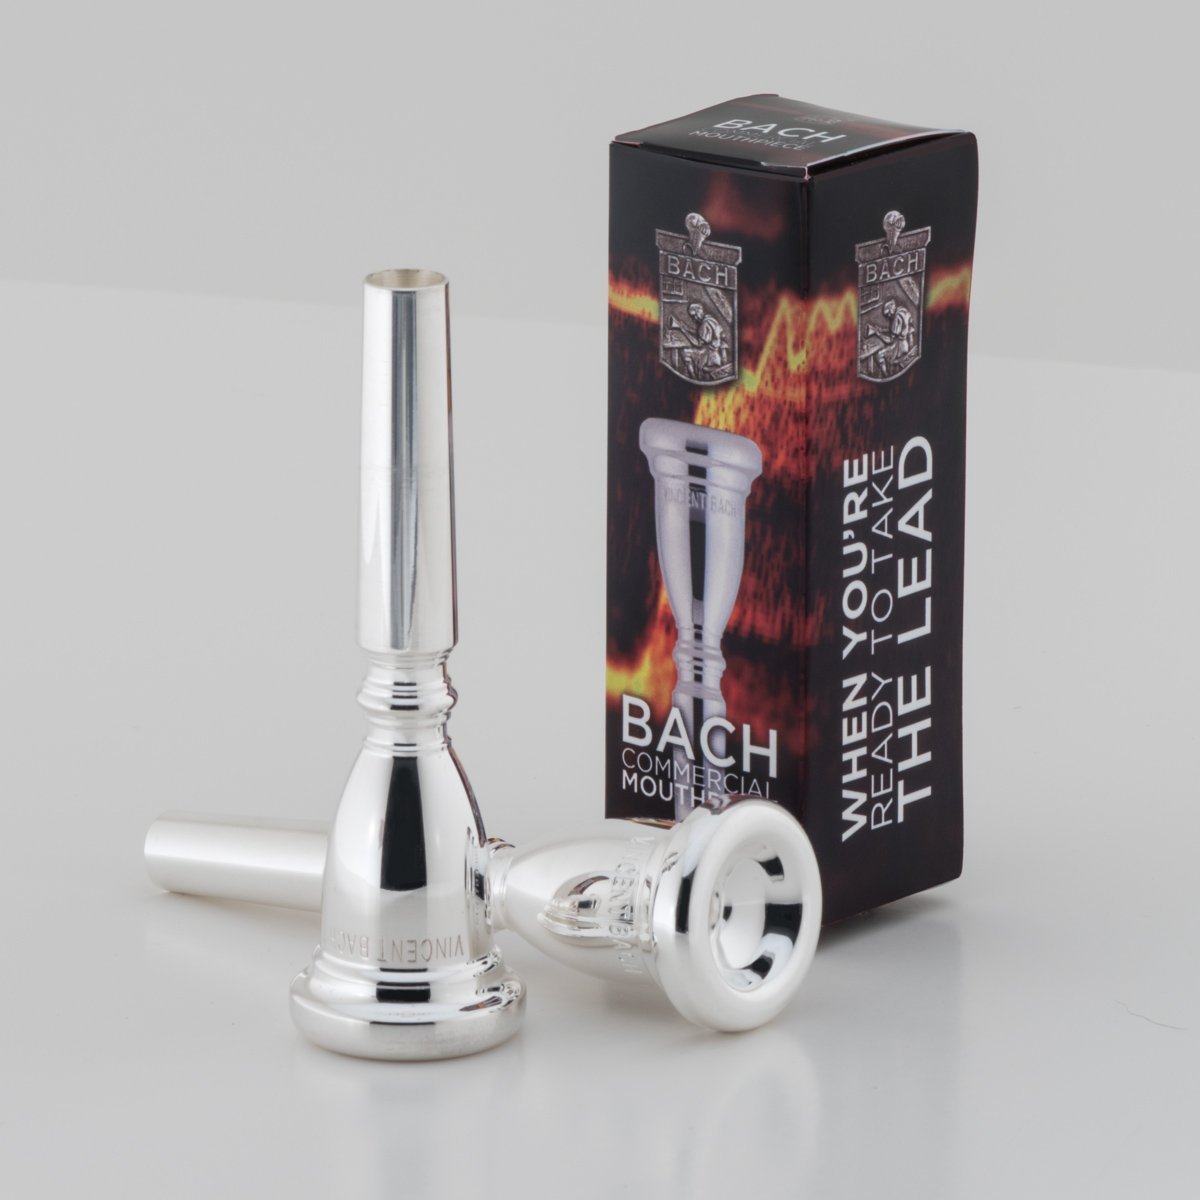 Genuine Bach Commercial Trumpet Mouthpiece 3S